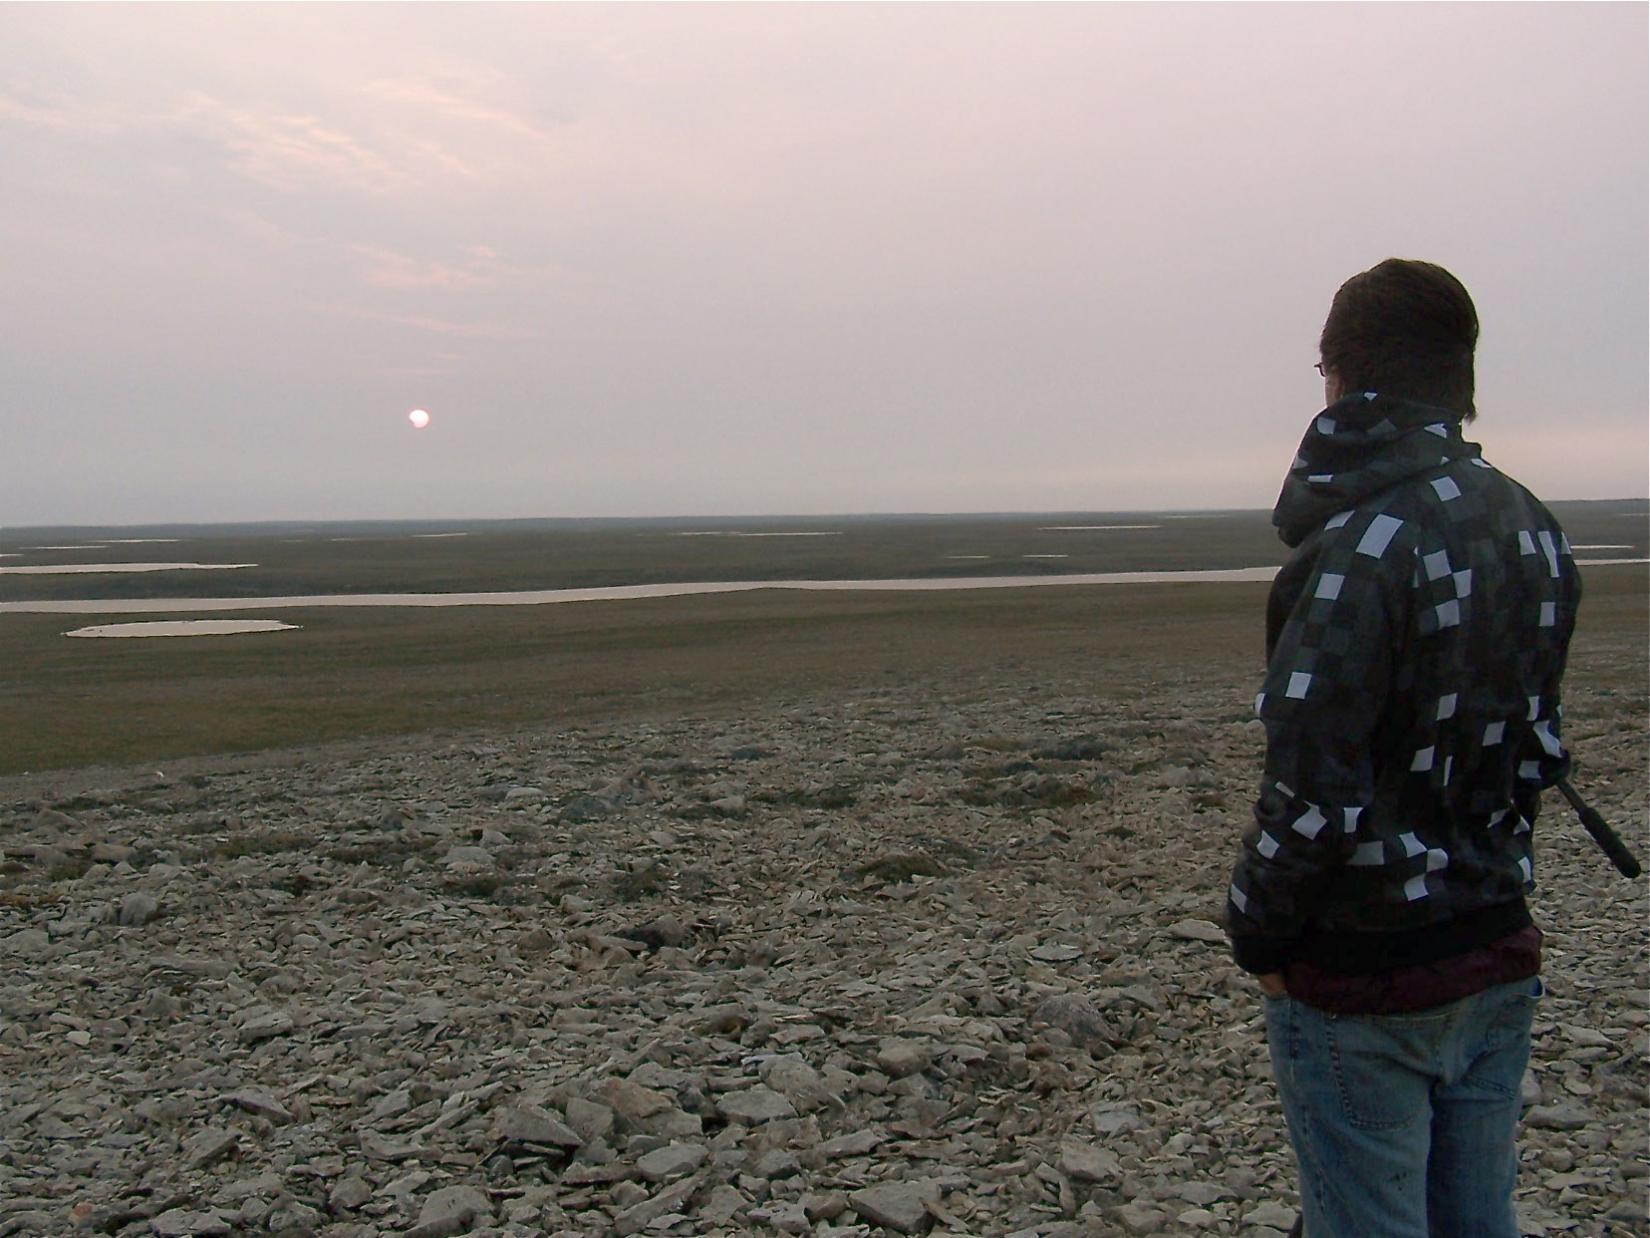 Photo of myself standing in Nunavut during the August 2008 solar eclipse